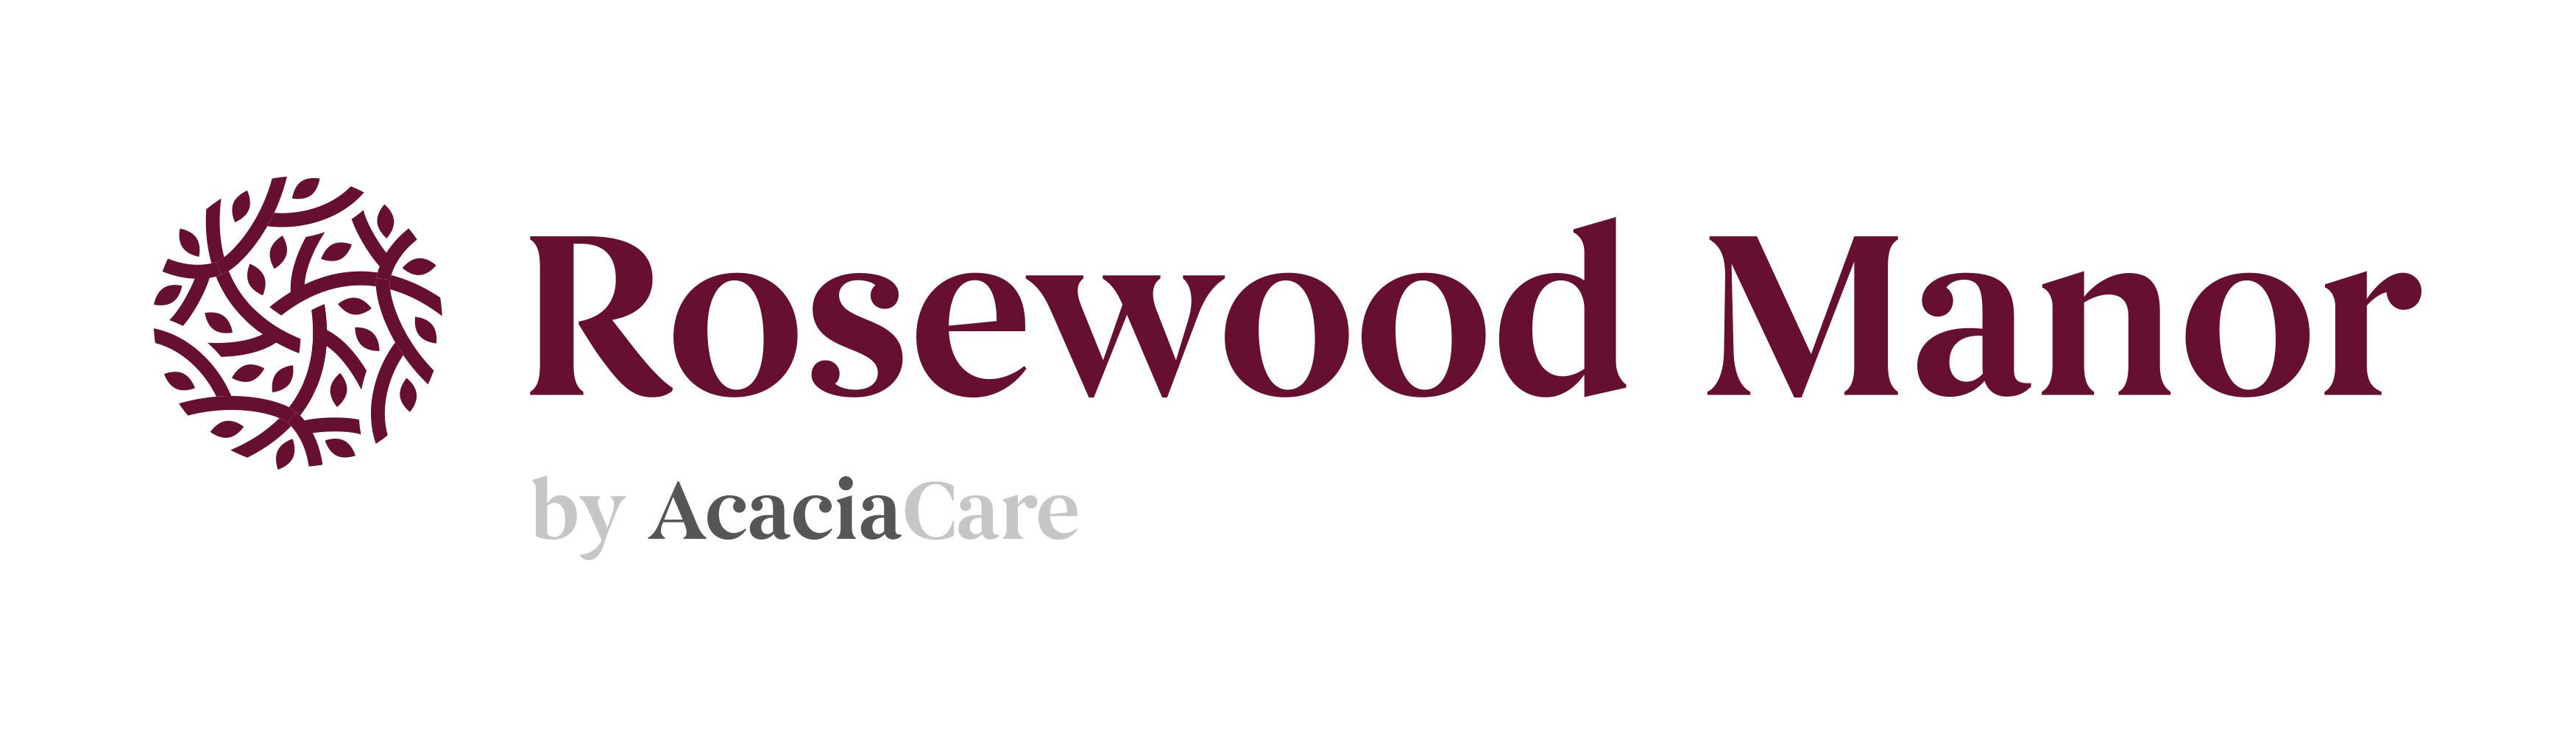 Rosewood Manor by Acacia Care Home